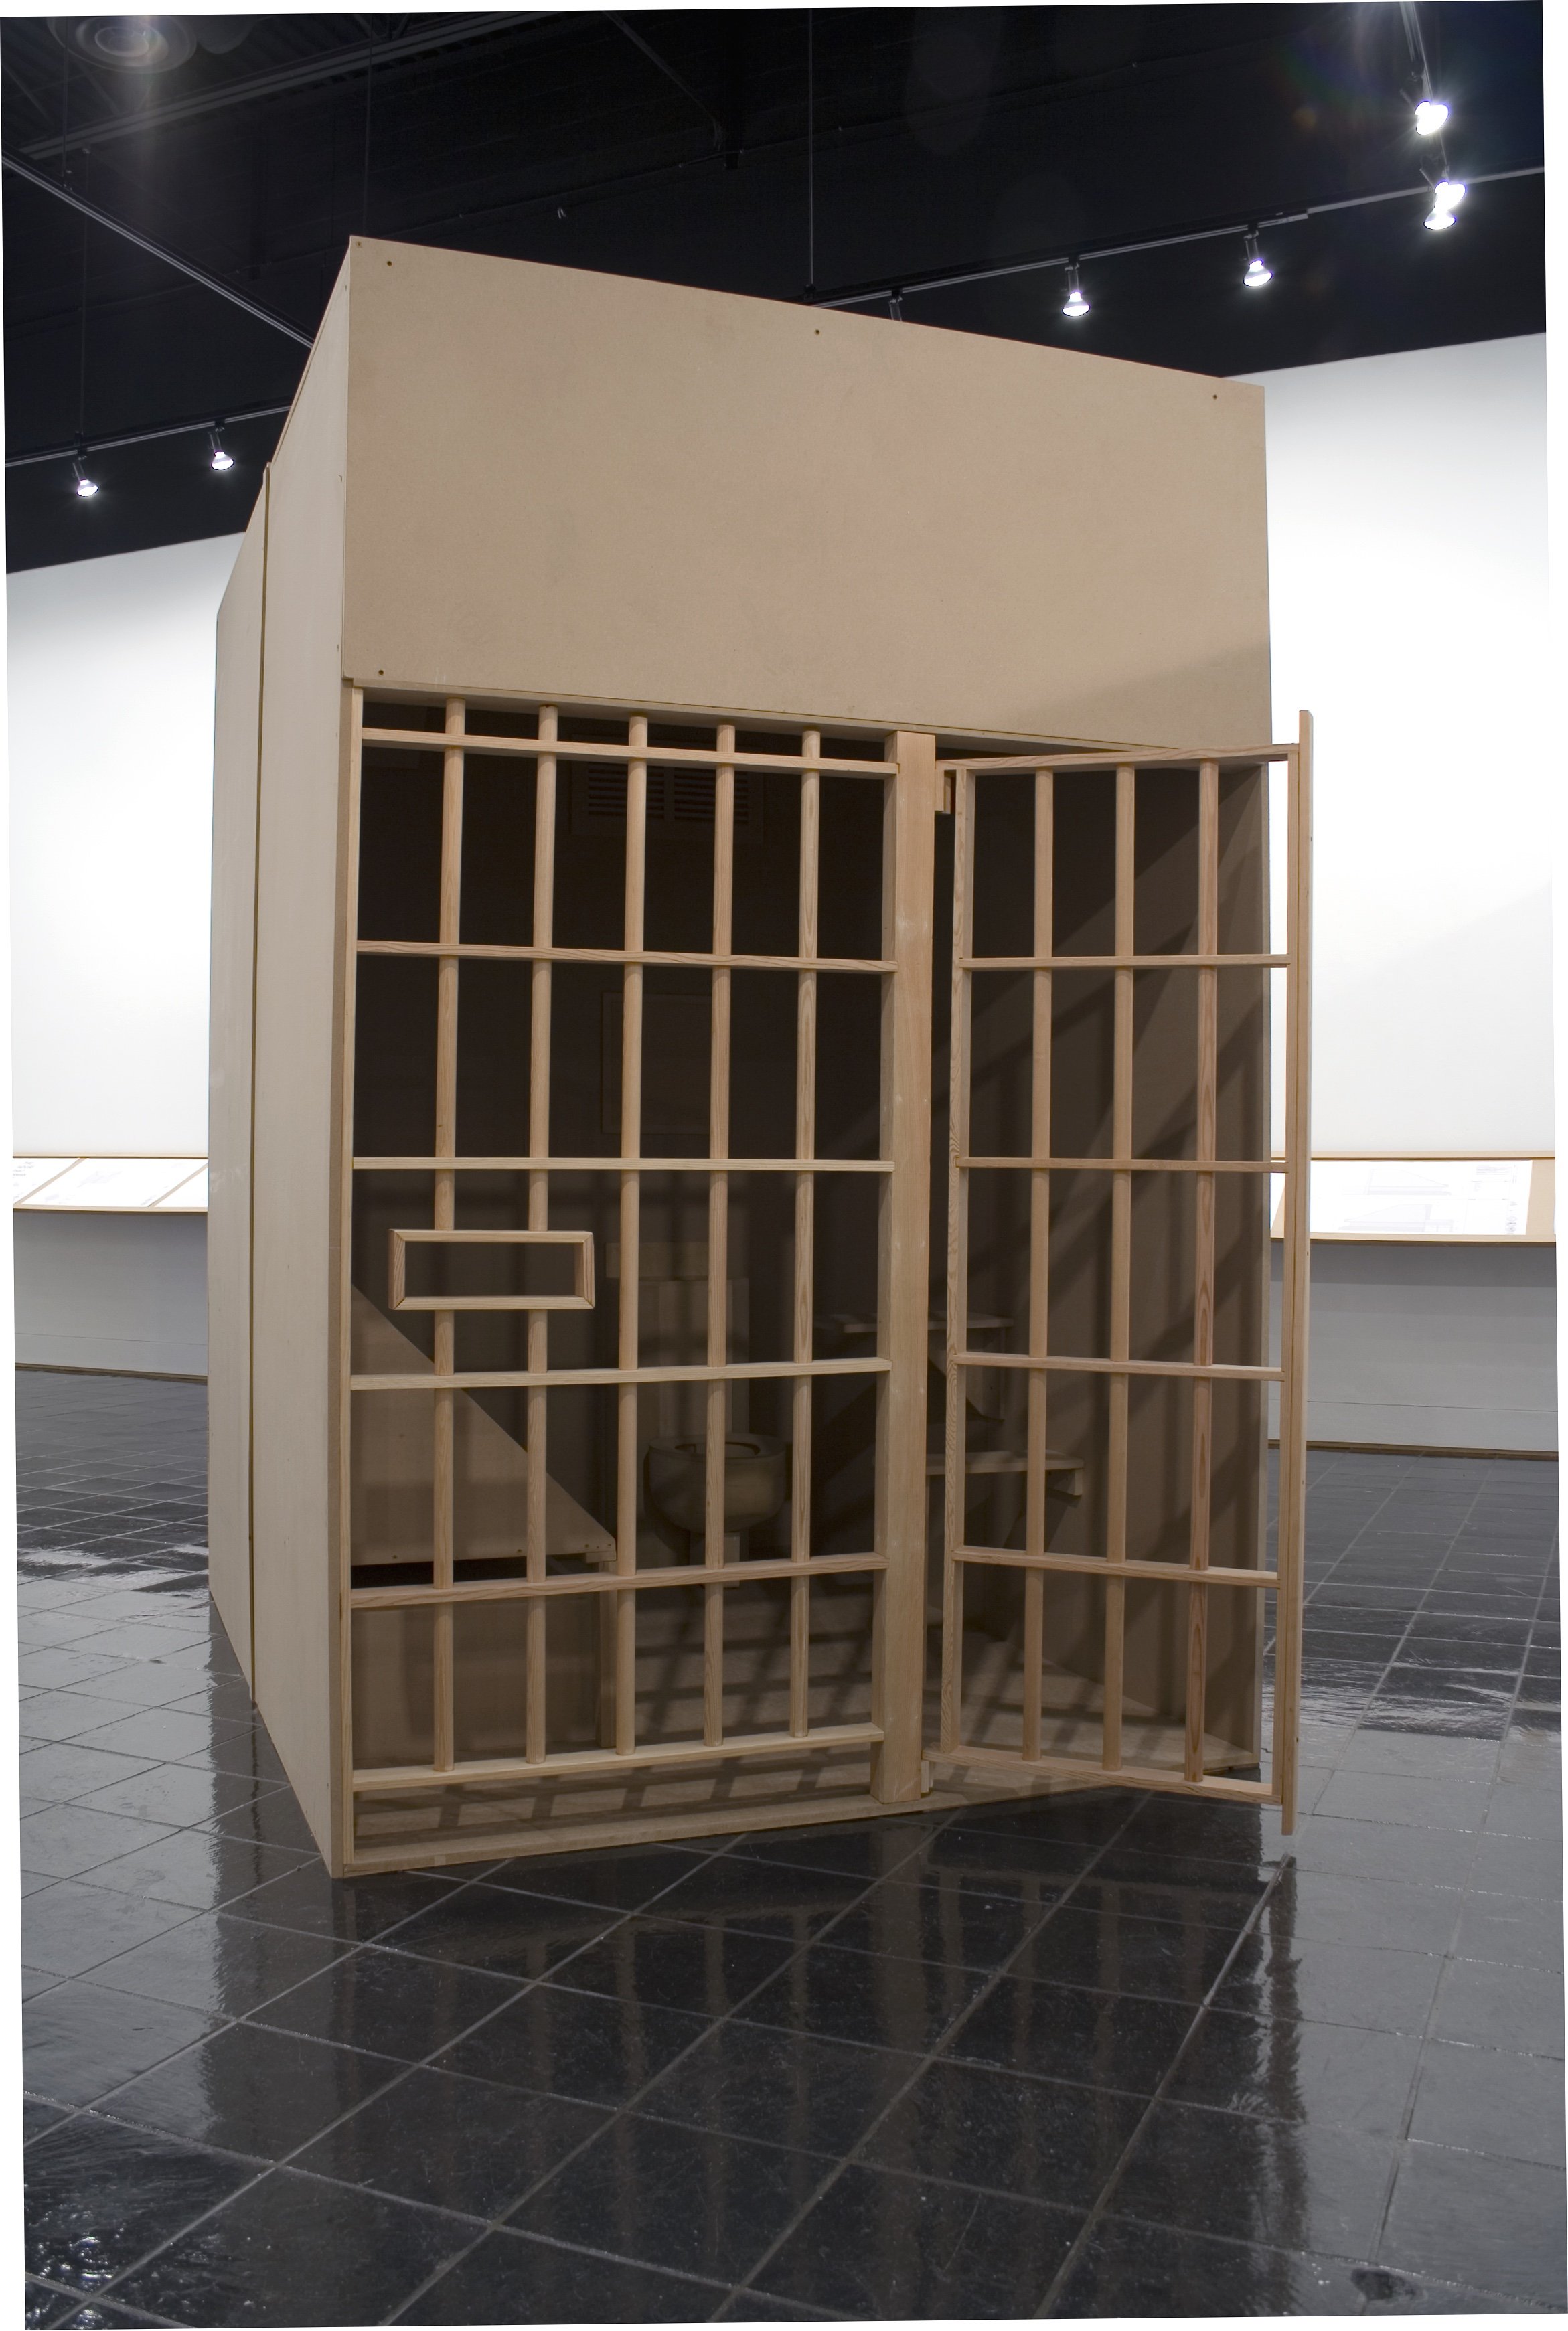  Jackie Sumell and Herman Wallace,  The House That Herman Built , 2002–ongoing, wood installation replica of 6-by-9-foot cell, print documentation, video with sound, posters, publication, and blueprints. Courtesy of the artists. 